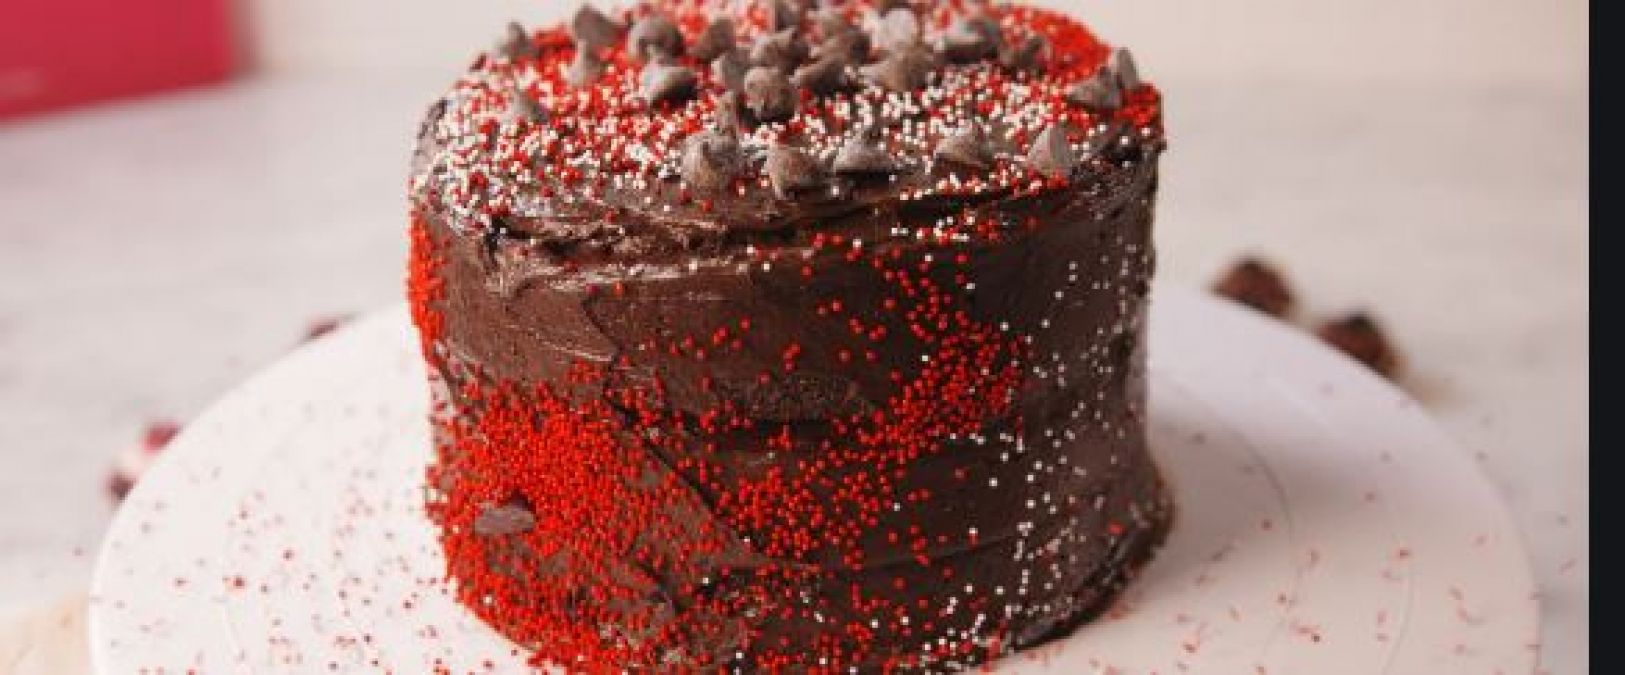 Make a chocolate cake for your partner on Chocolate Day